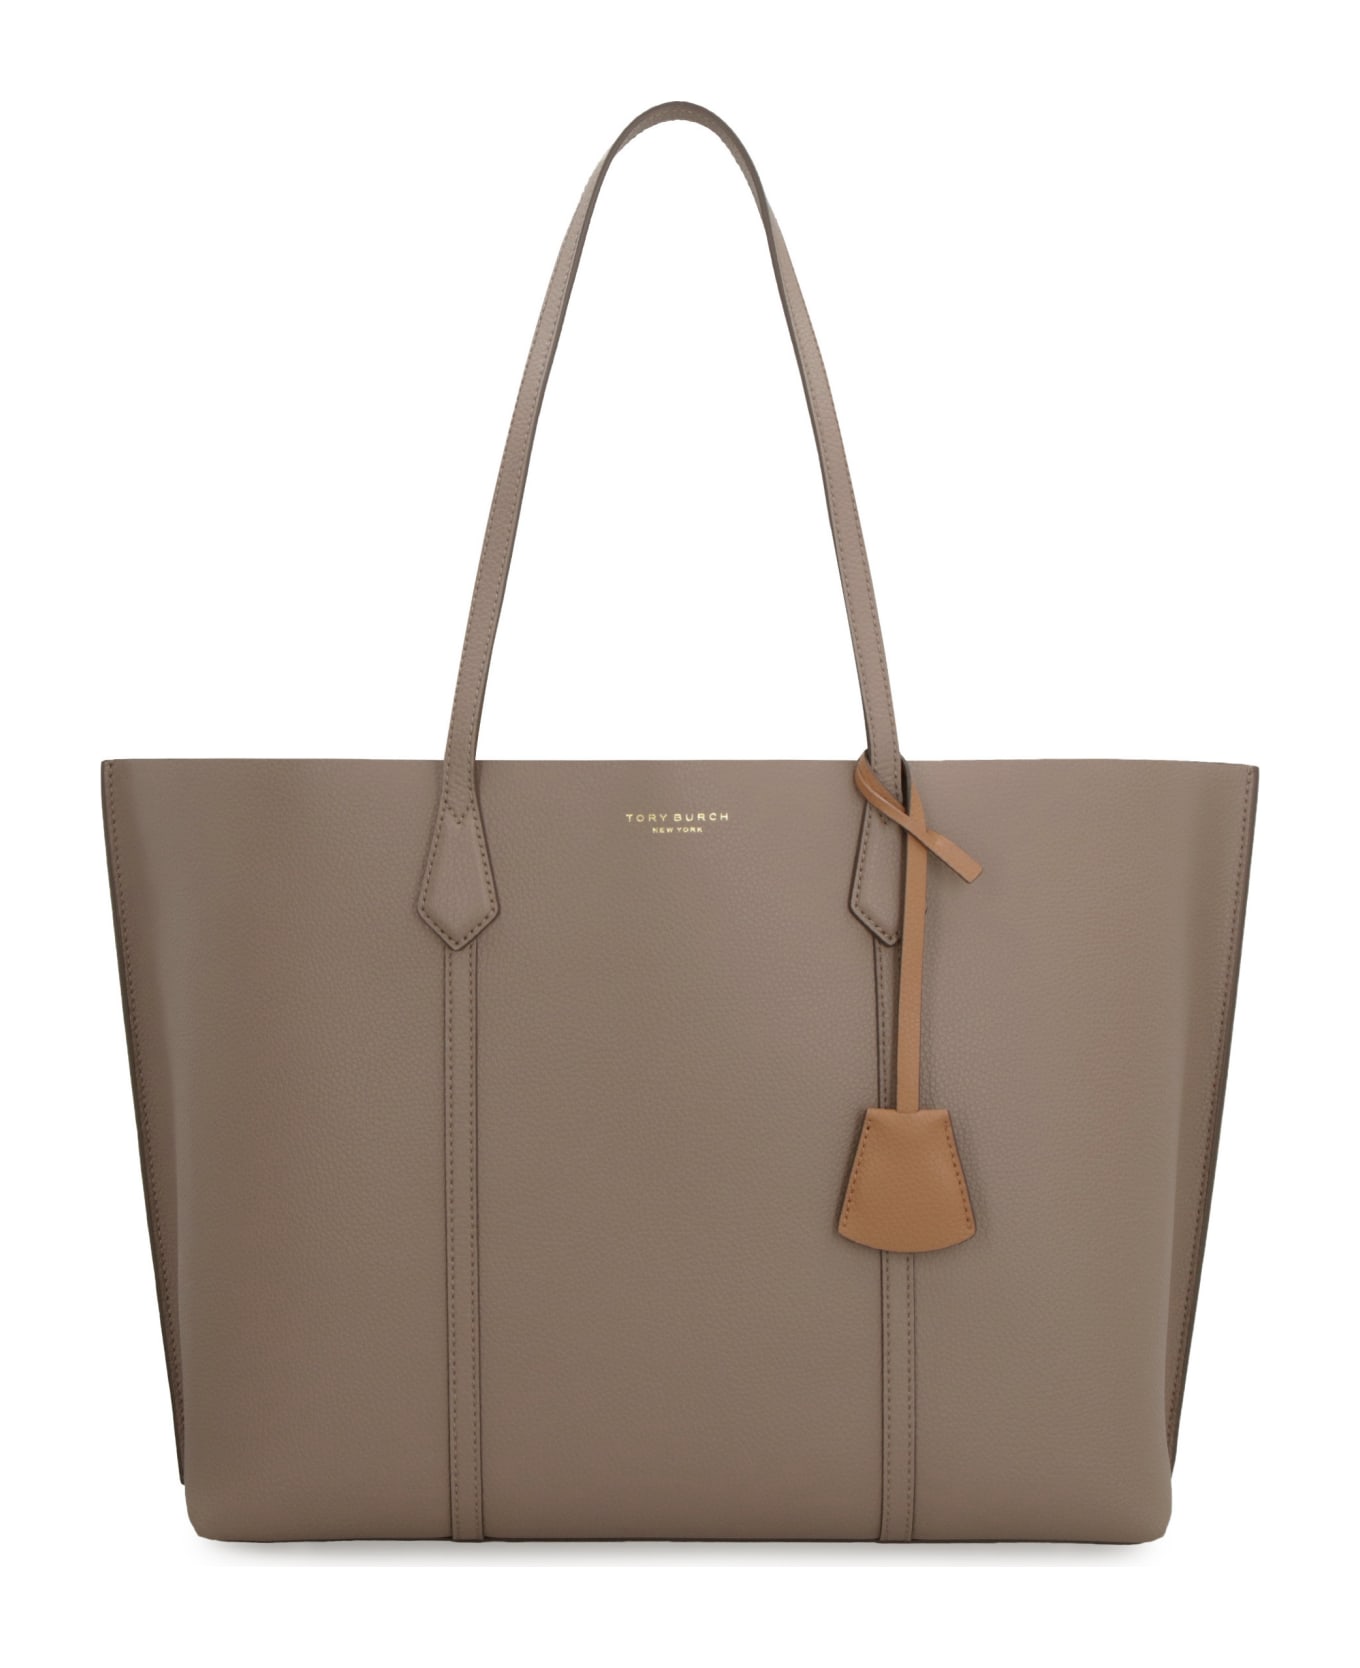 Tory Burch Perry Smooth Leather Tote Bag - turtledove